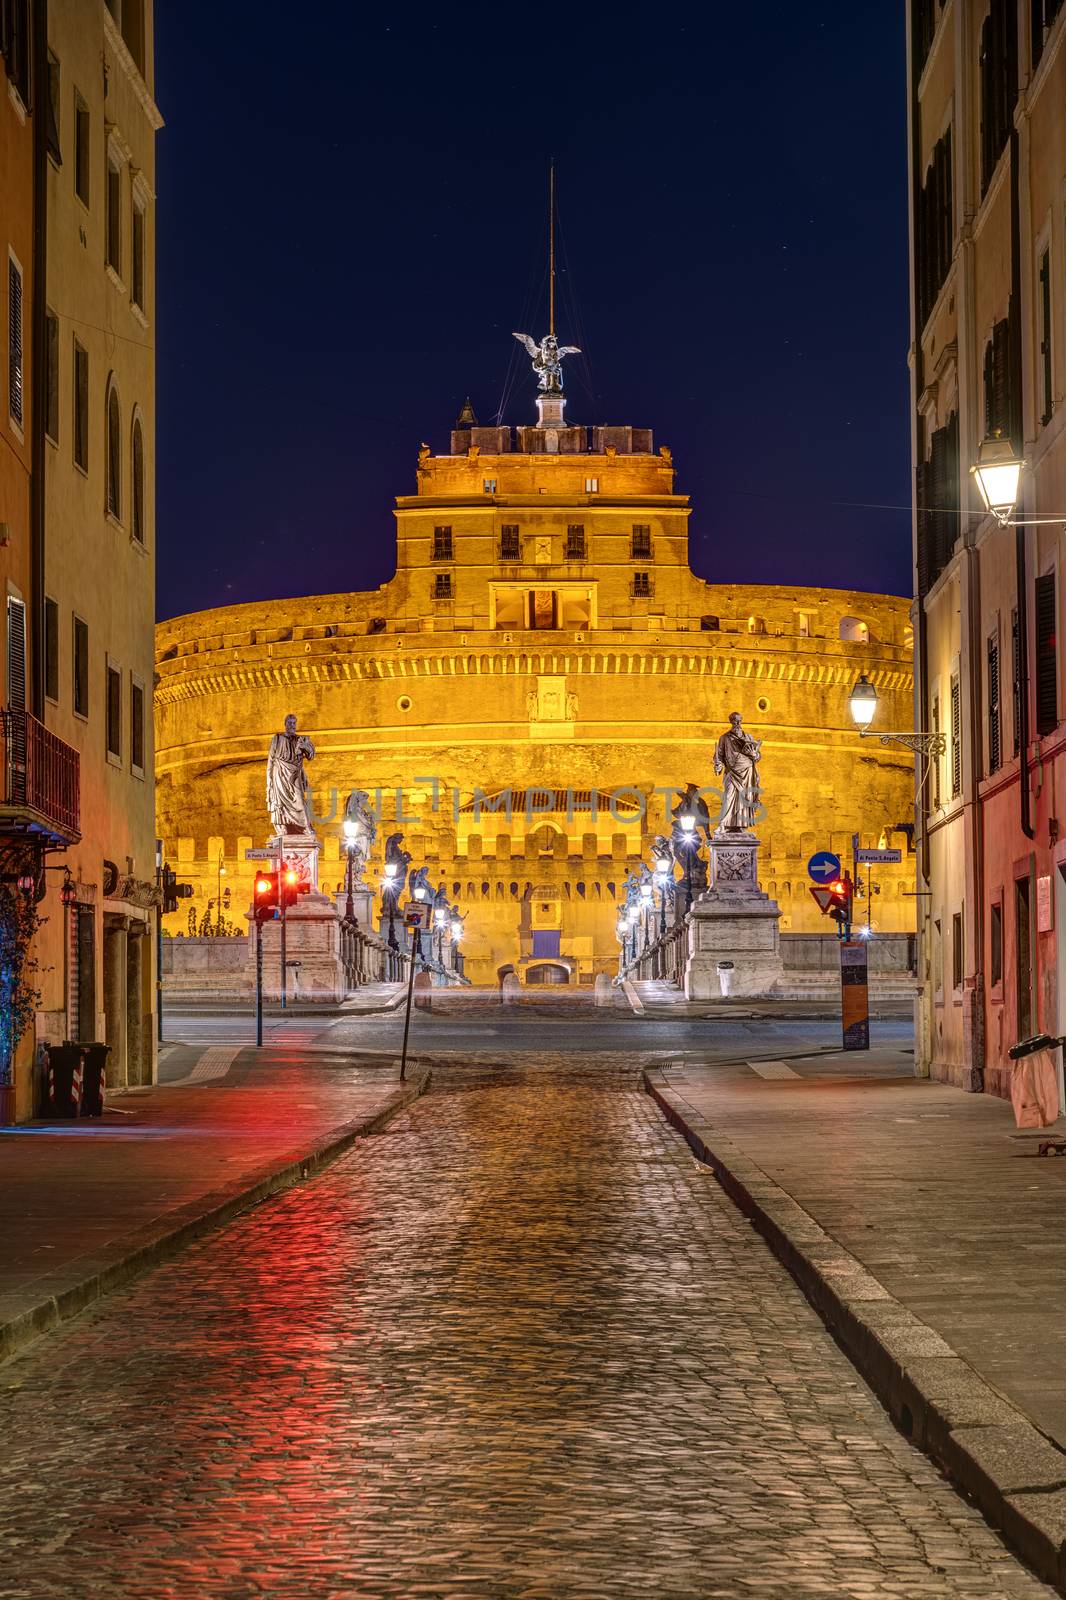 View to the Castel Sant Angelo and the Sant Angelo bridge in Rome at night